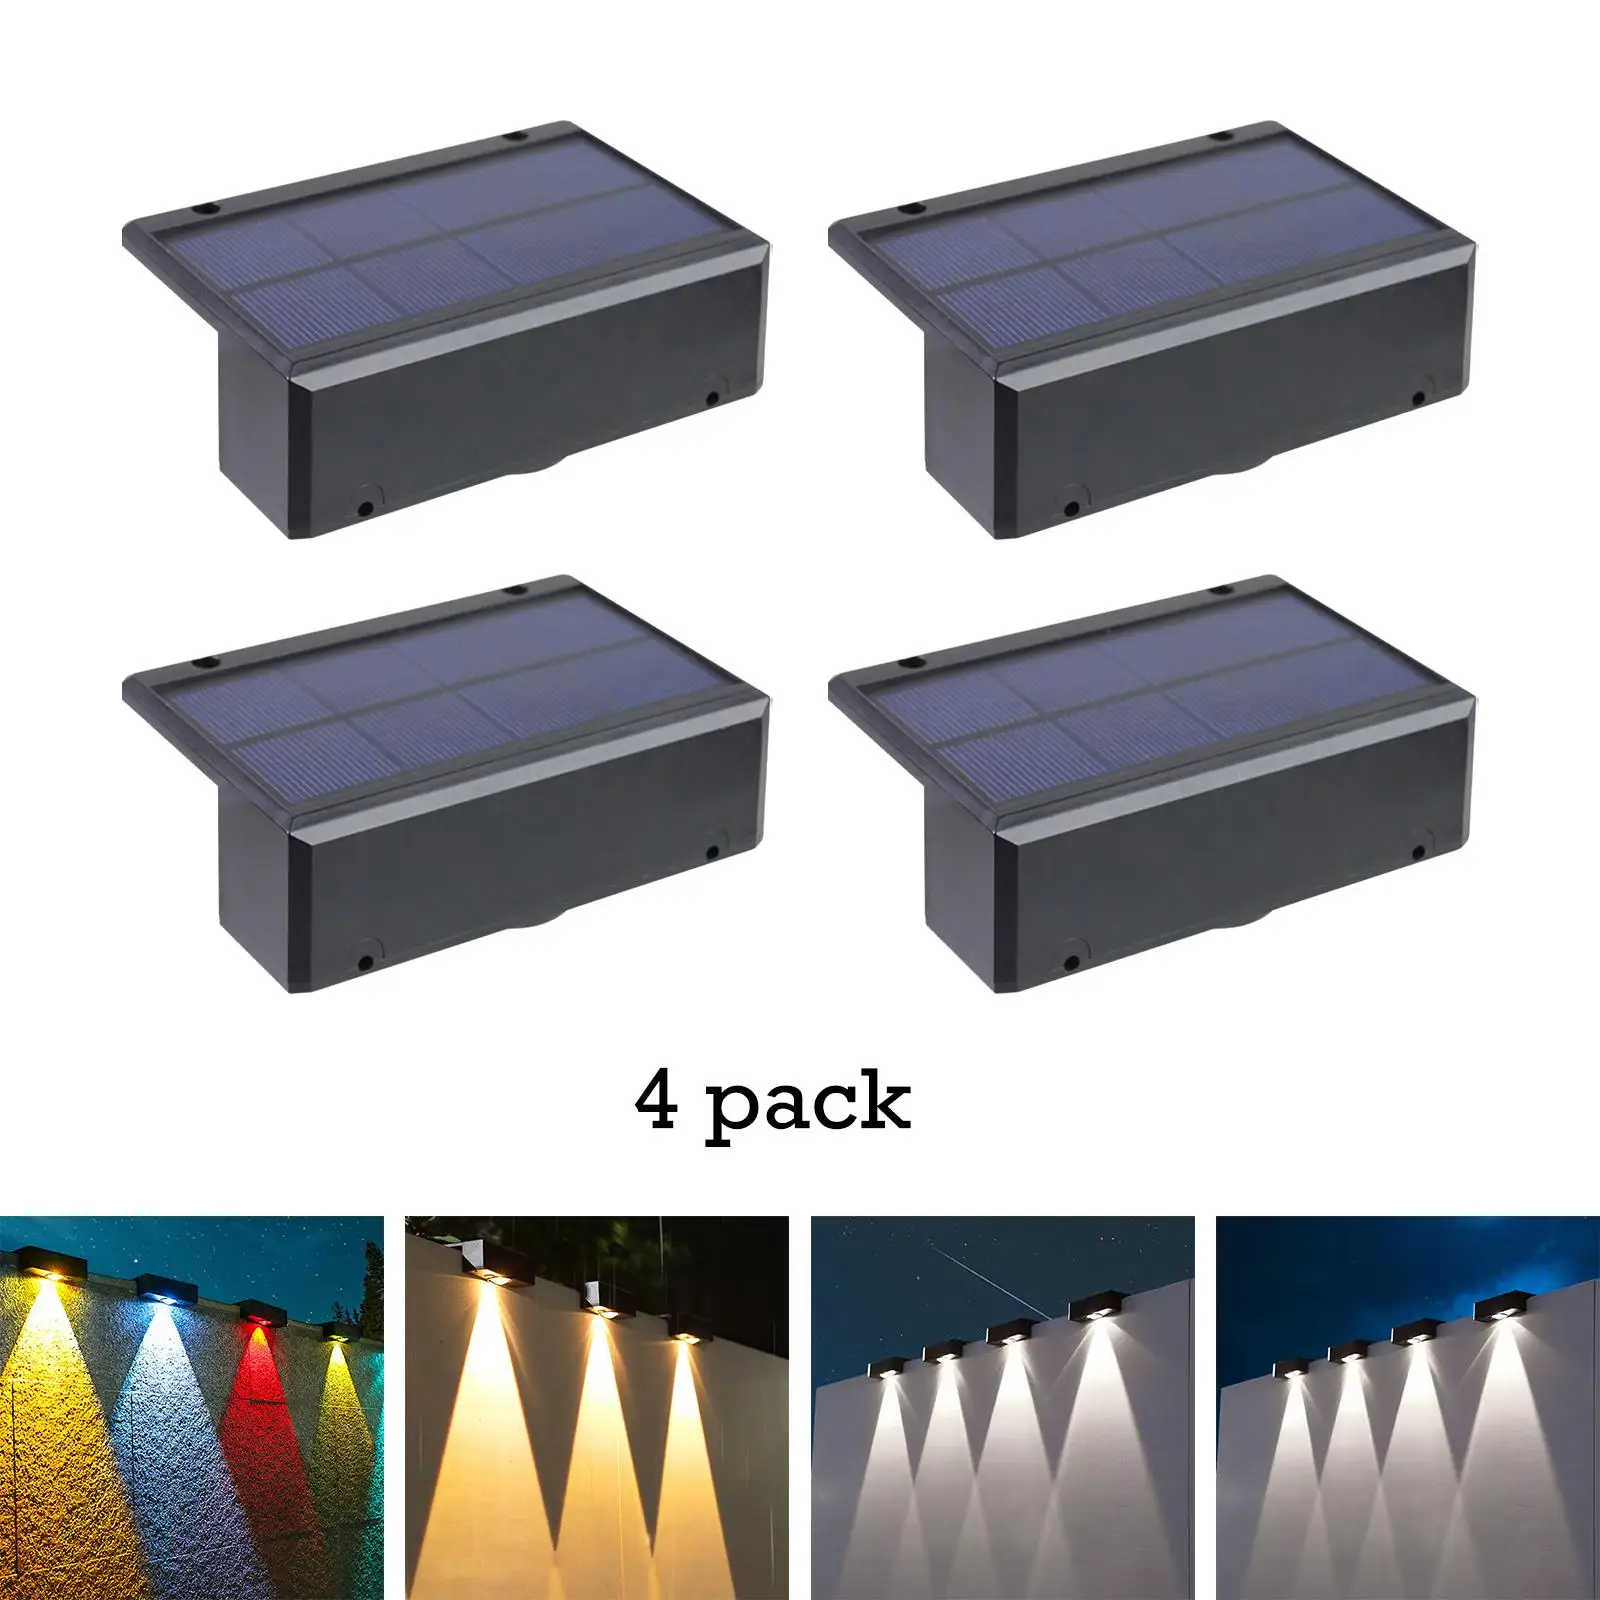 4 Pieces Solar Powered Fence Lights IP65 Waterproof Decorative Exterior Light Fixture for Steps Wall Lights Yard Porch Pathway